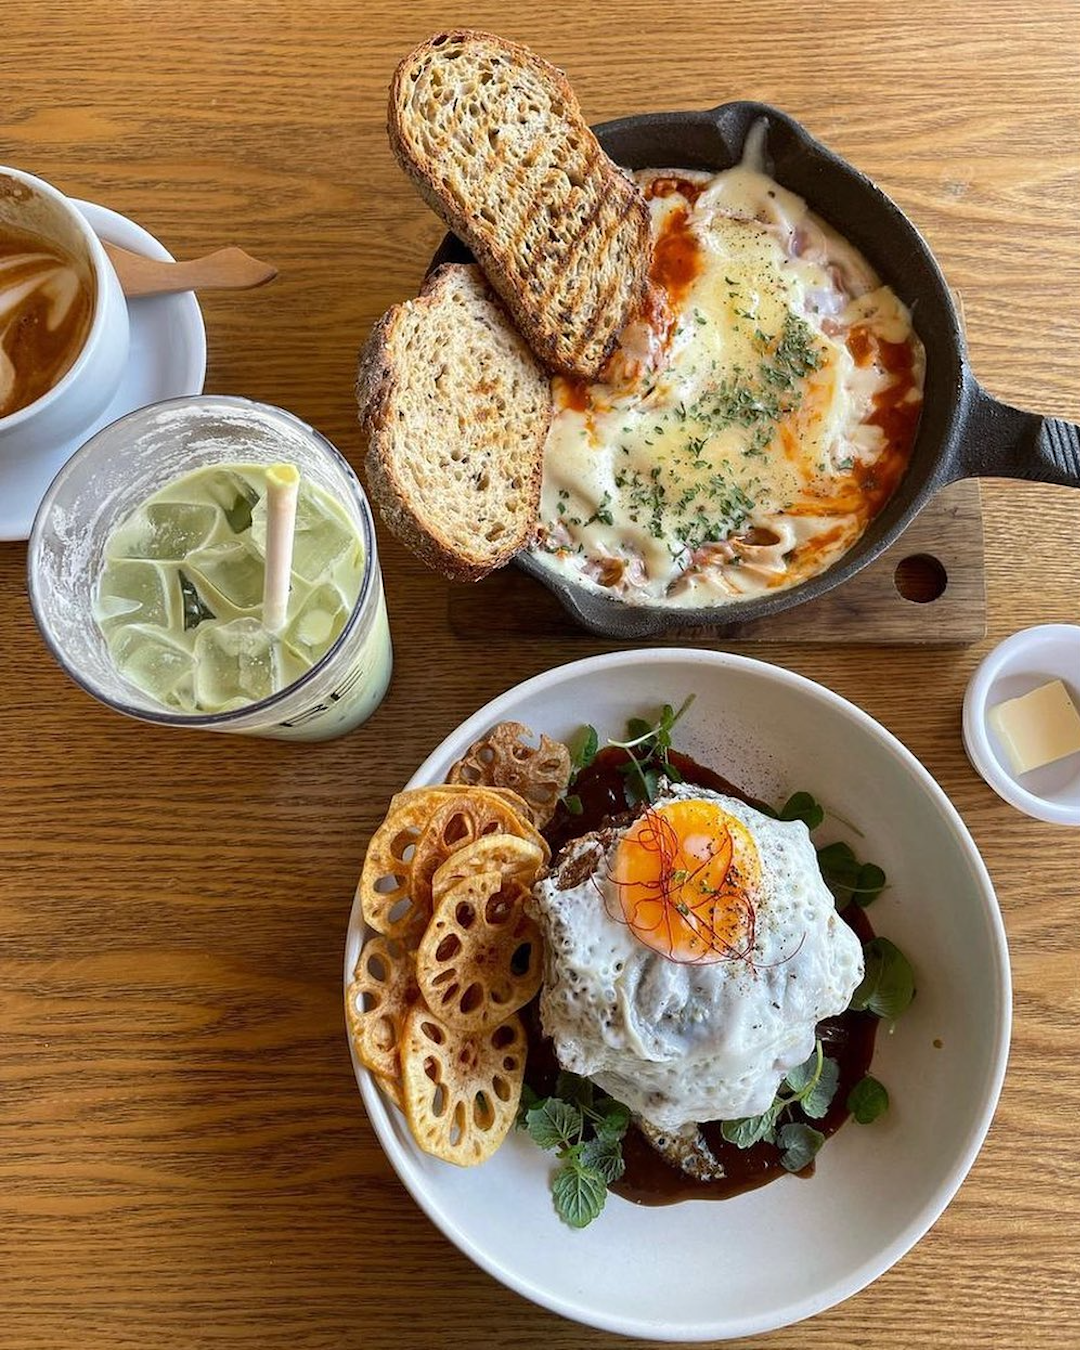 Breakfast dishes at Brown Spoon Cafe